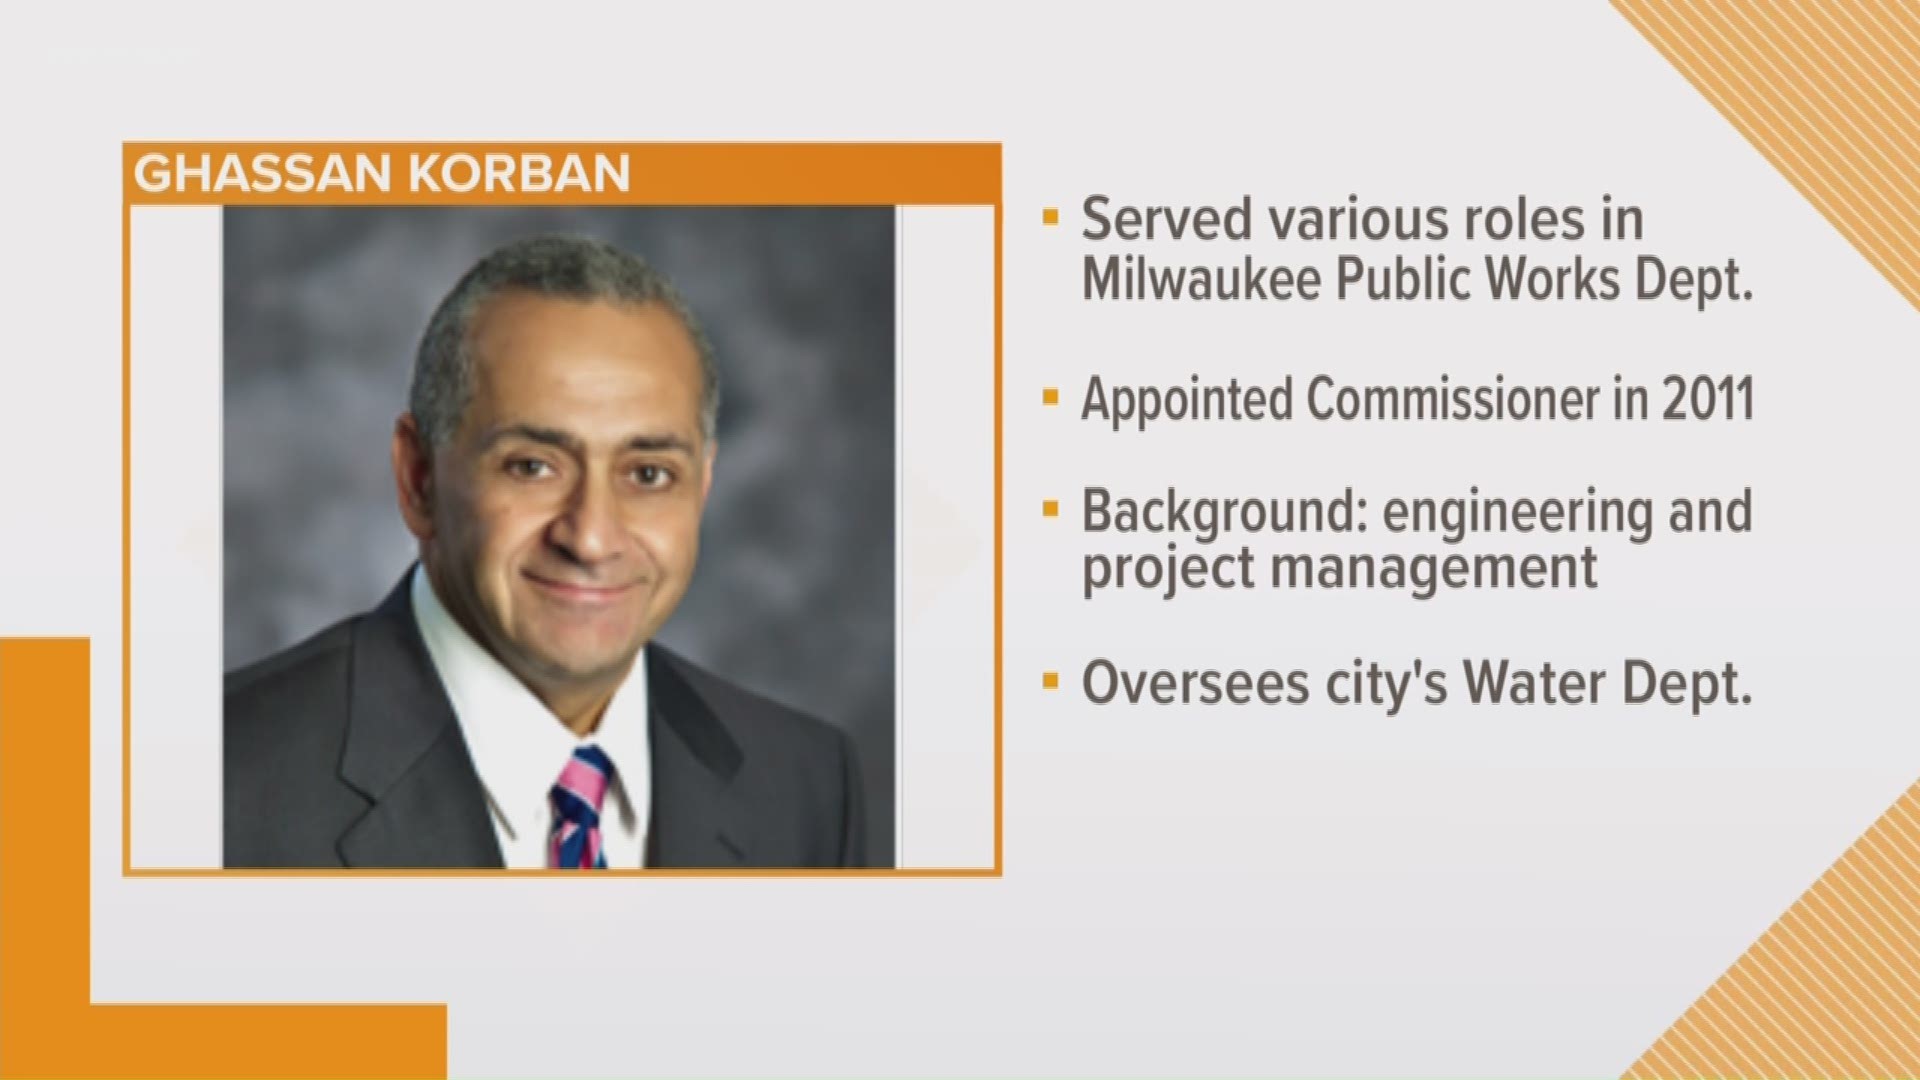 Korban is Milwaukee's commissioner of public works. He has a background in engineering and project management and currently oversees the city's water department.